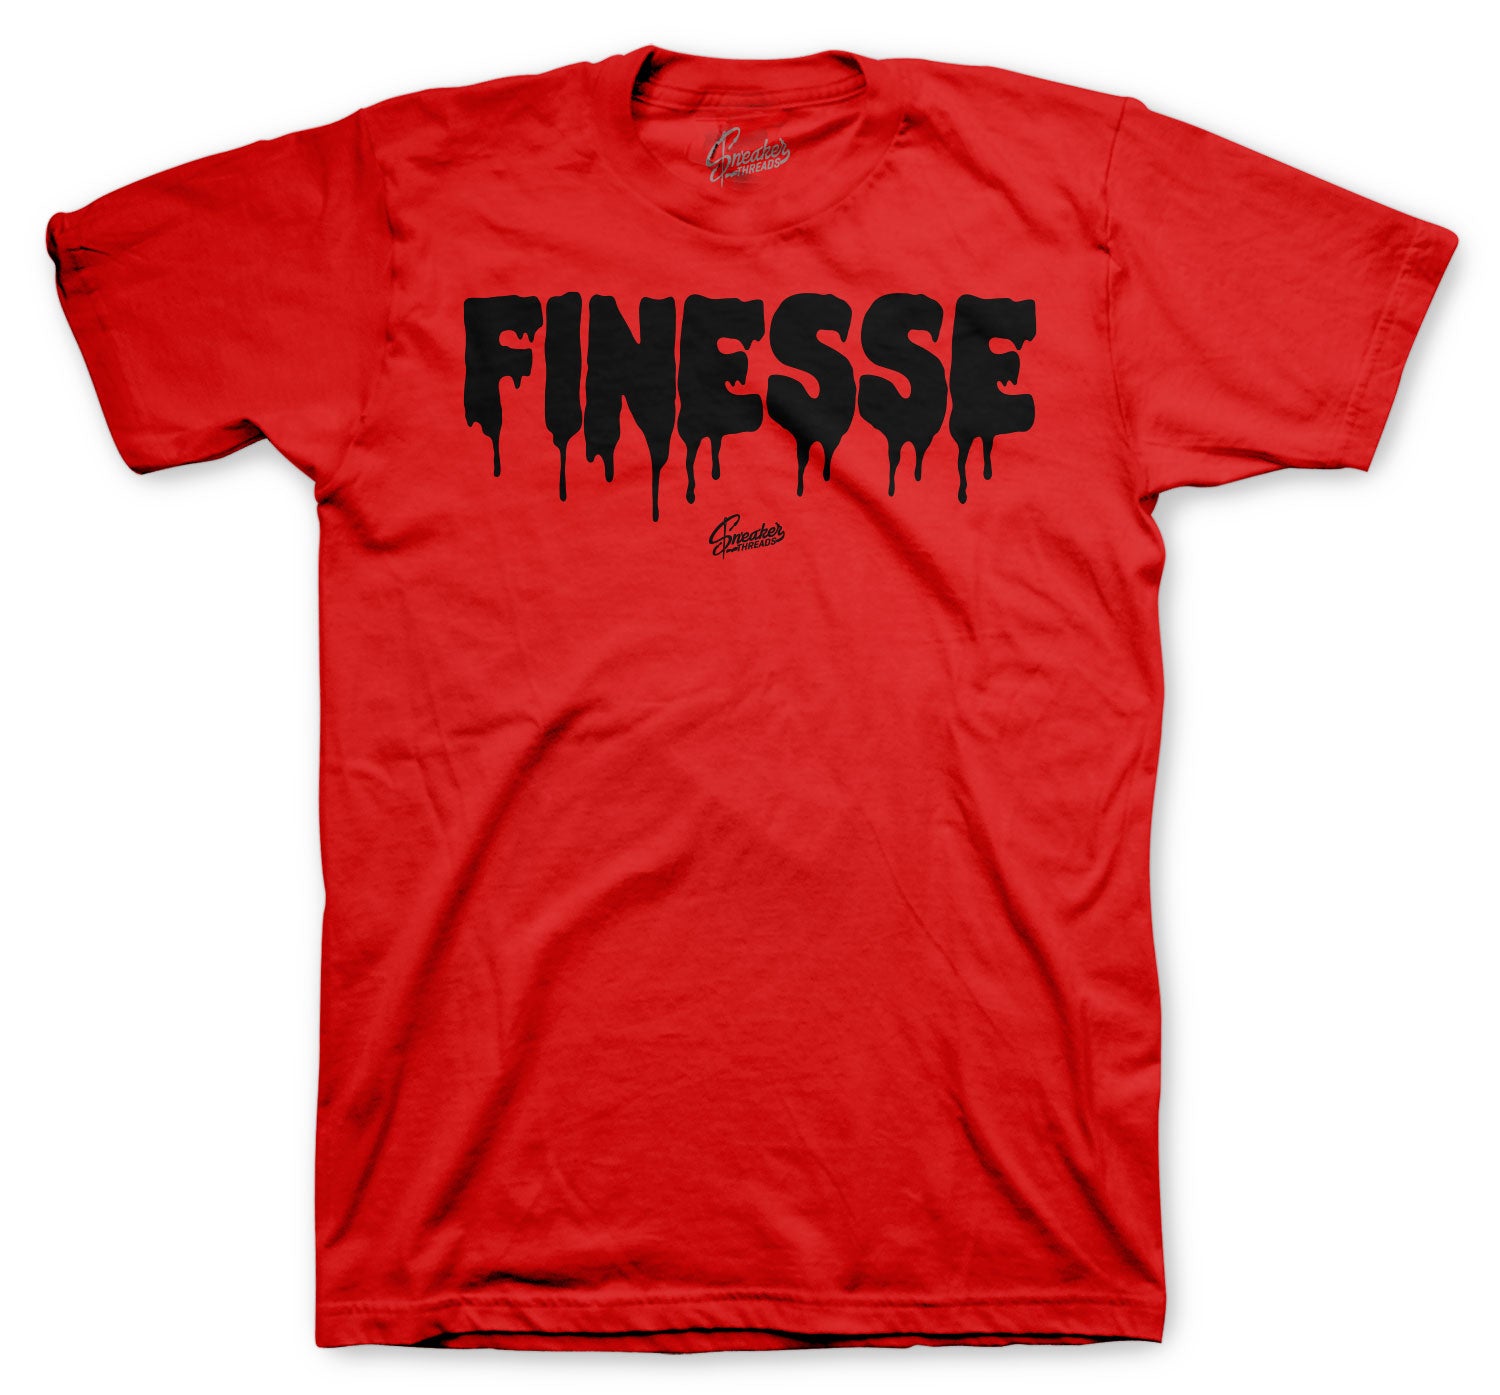 Bred 350 Shirt - Finesse - Red